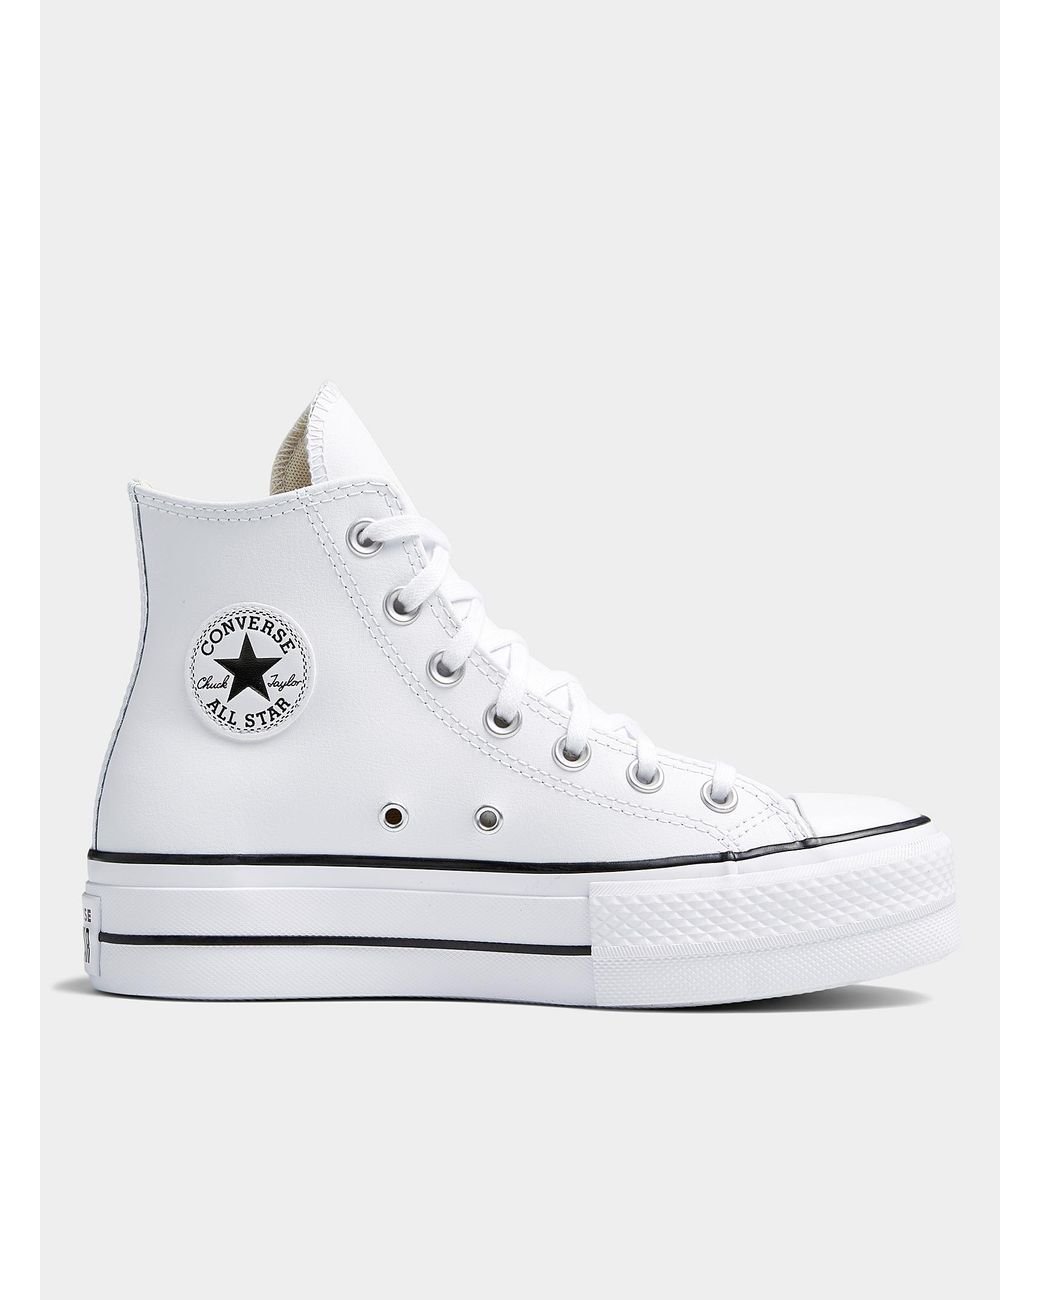 Converse Chuck Taylor All Star High Top White Leather Platform Sneaker ...